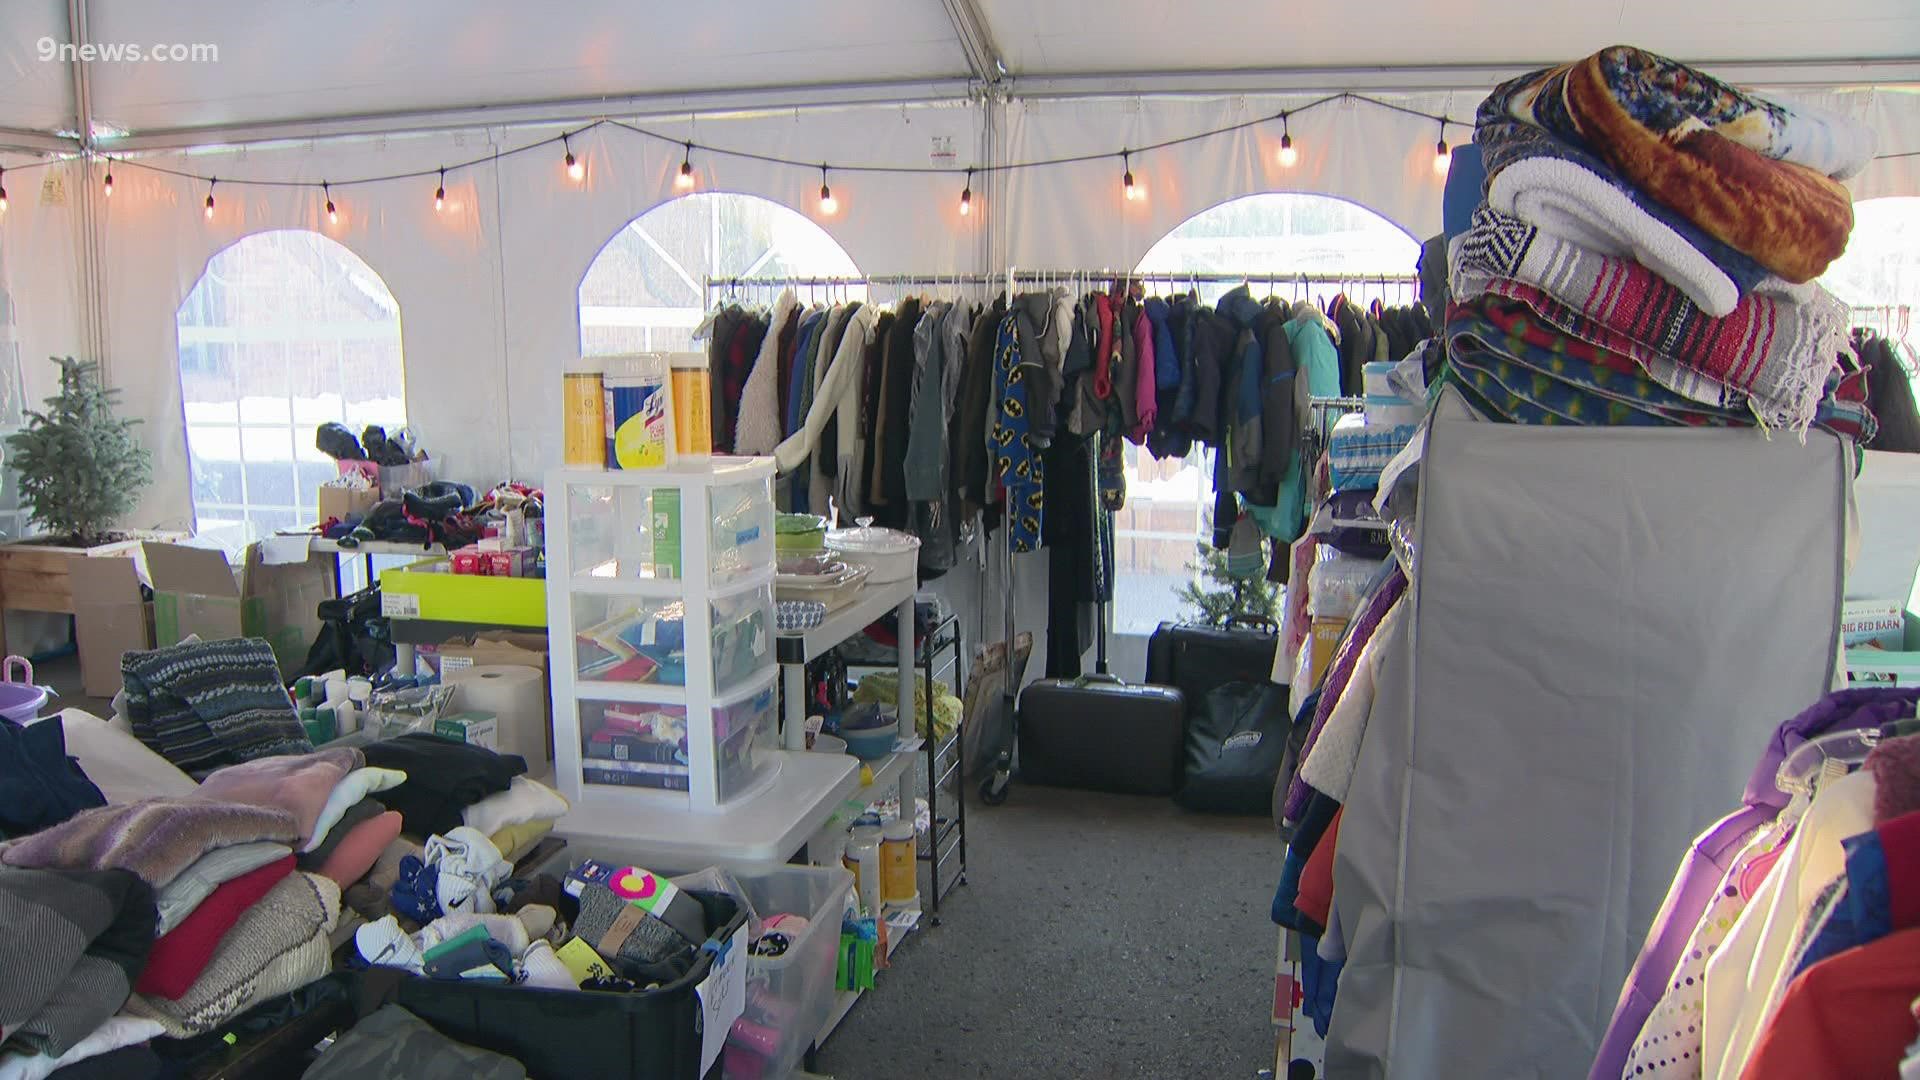 Blackbelly restaurant accepted donations of clothing, medicine and toys for fire victims, but a thief cut through the storage tent and took items.